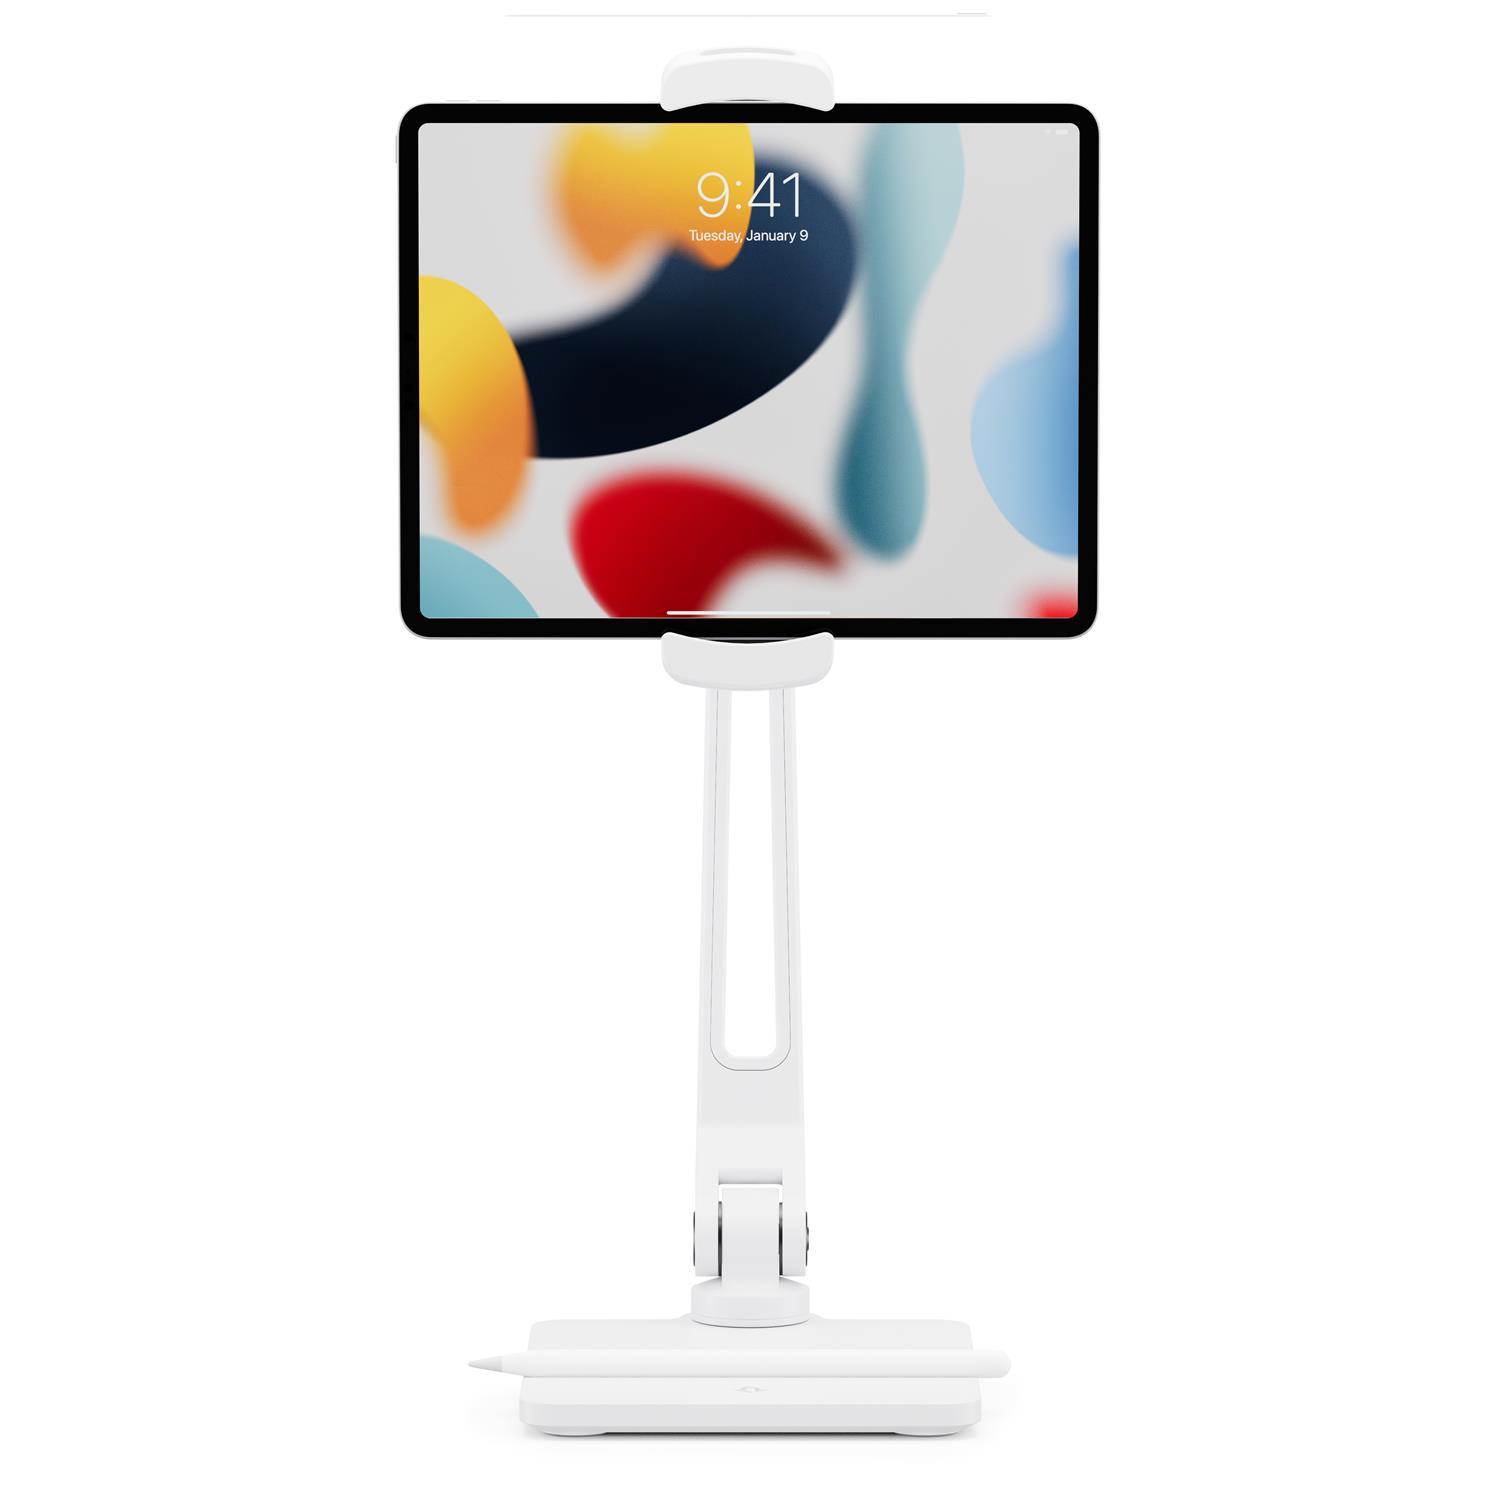 Twelve South HoverBar Duo with Snap adjustable holder for iPad, tablets - White